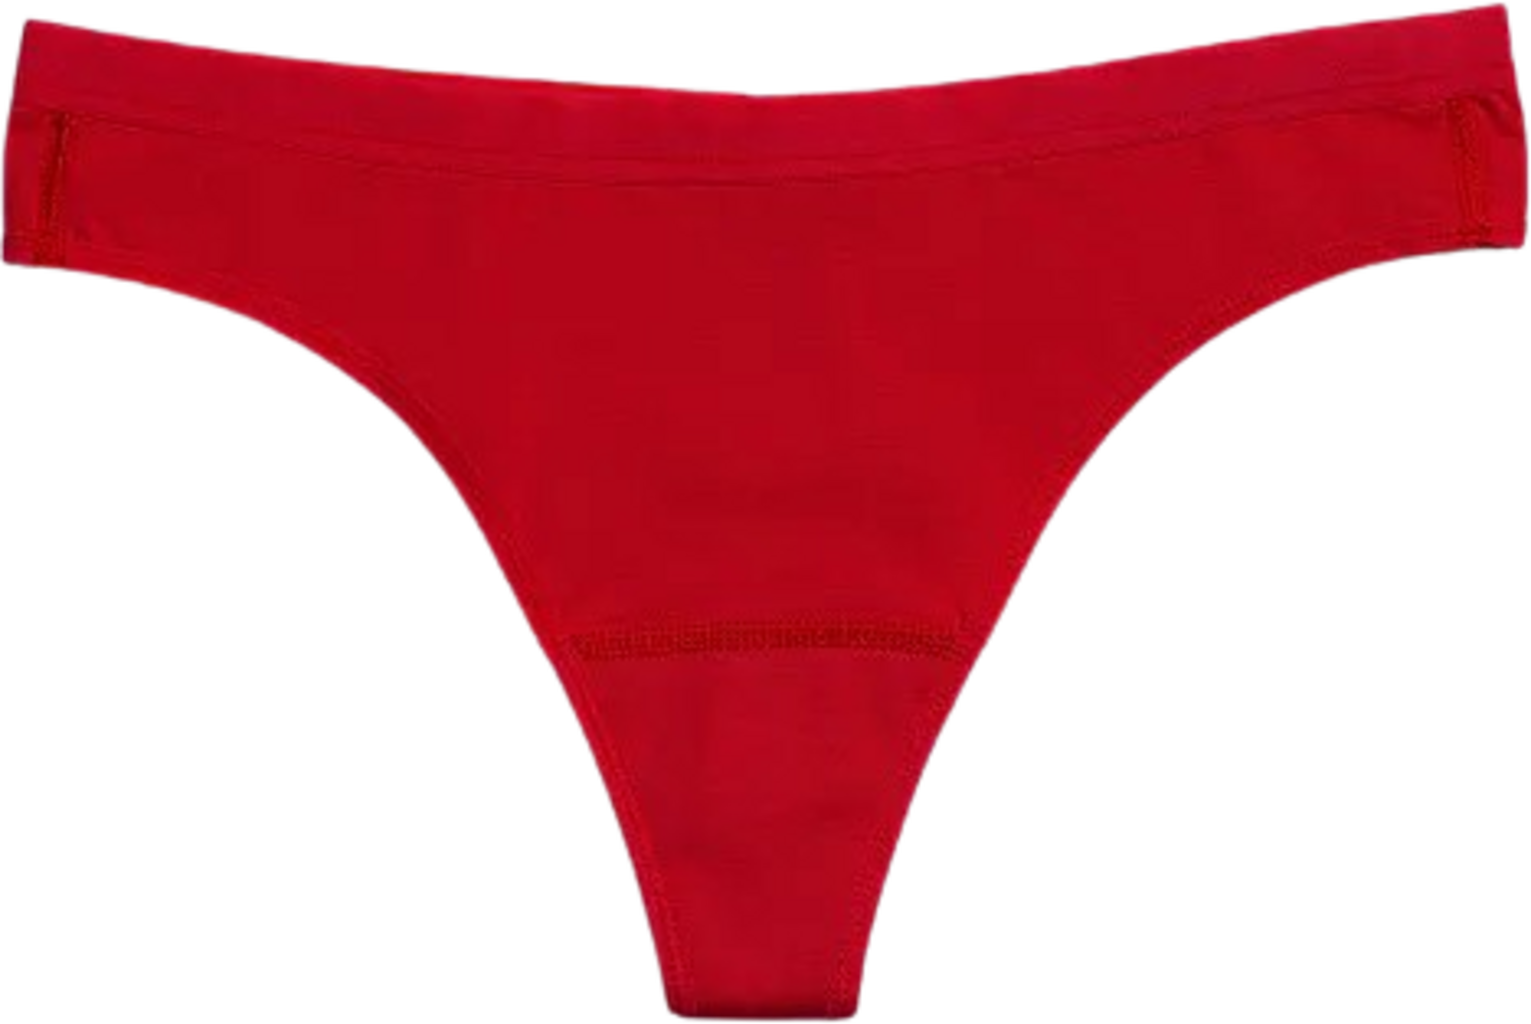 Period. by The Period Company The Light Absorbency Thong Period